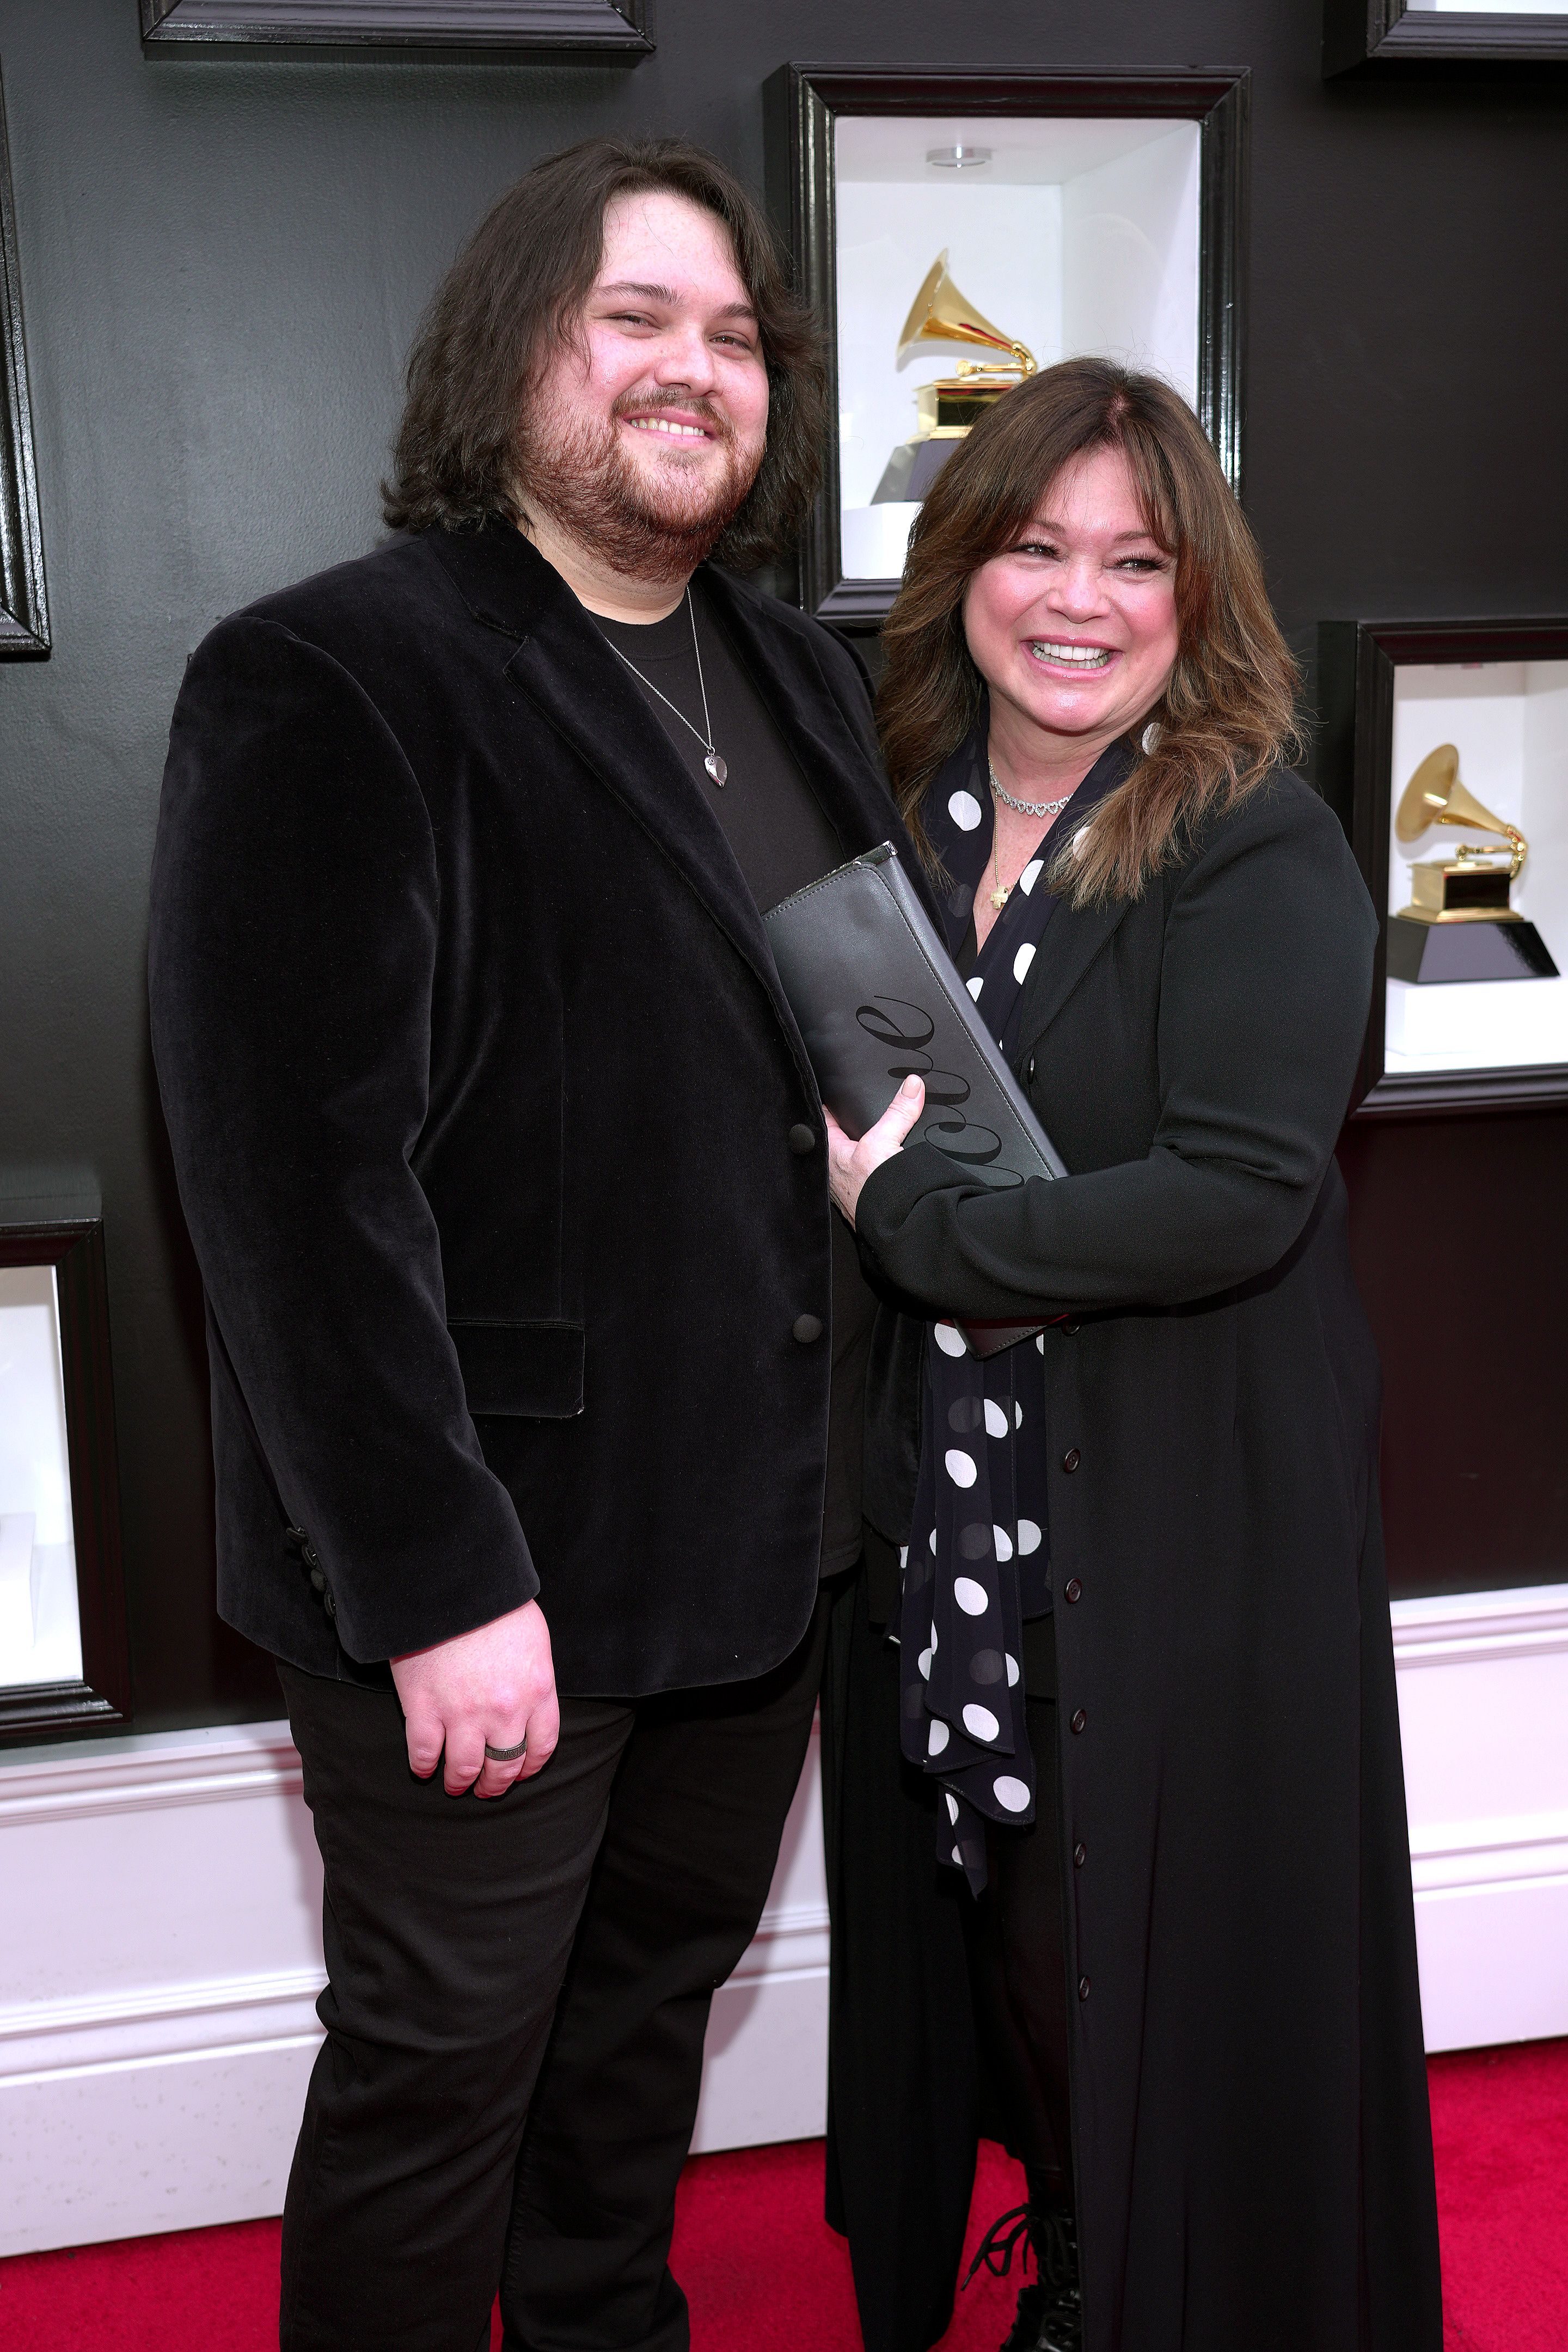 Valerie Bertinelli and Wolfgang Van Halen at the 64th Annual Grammy Awards in April 2022 | Source: Getty Images